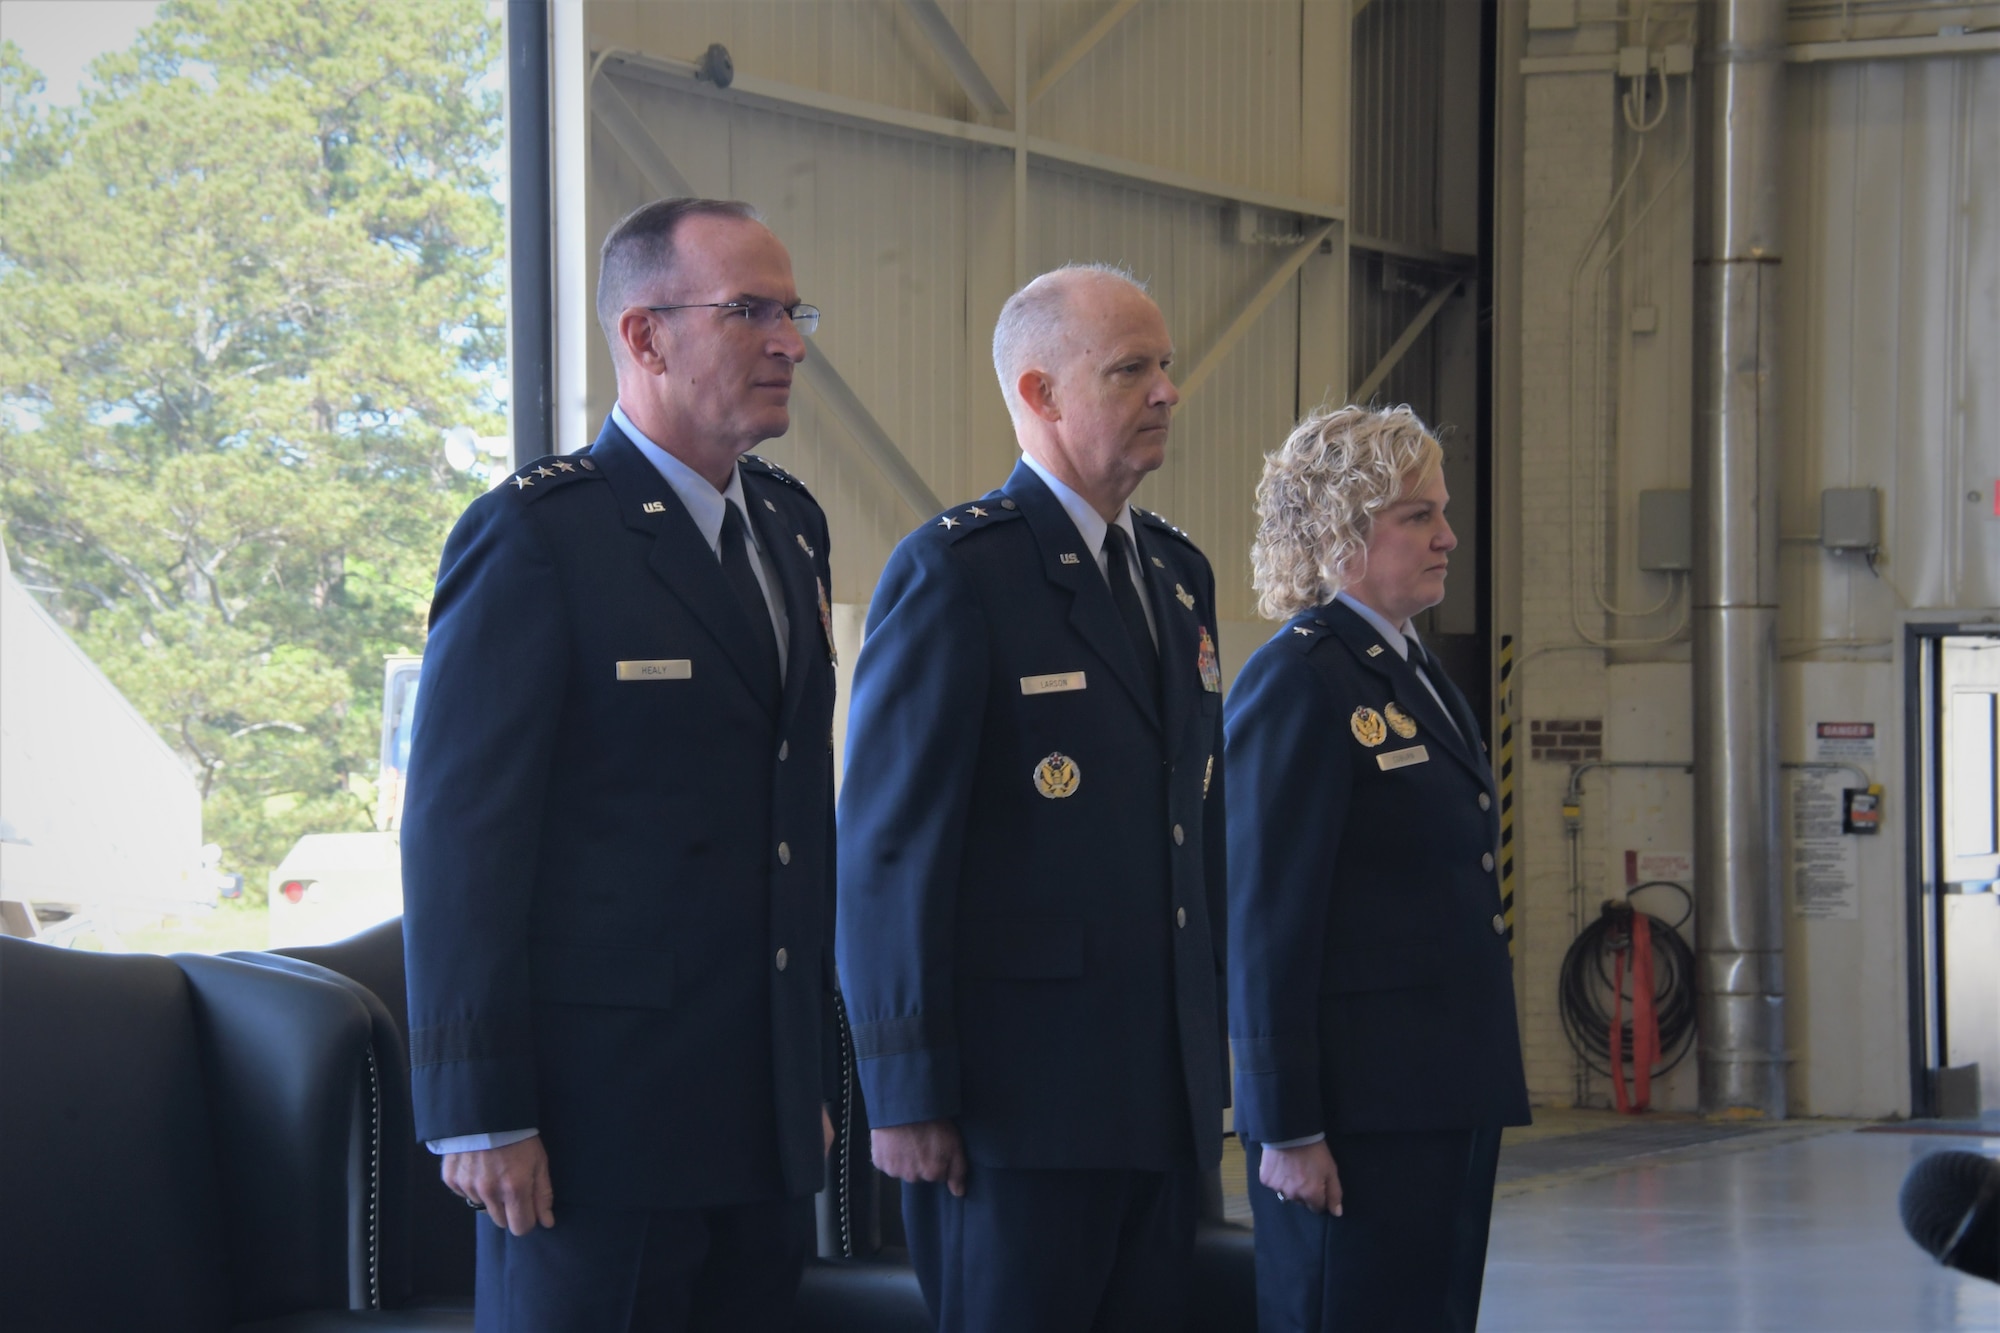 Brig. Gen. Melissa A. Coburn (right) prepares to take command of 22nd Air Force from Maj. Gen. Bret C. Larson (center) during a ceremony at Dobbins Air Reserve Base, Georgia, April 2. 2023. The ceremony was officiated by Lt. Gen. John P. Healy (left) commander of Air Force Reserve and Chief of the Air Force Reserve.